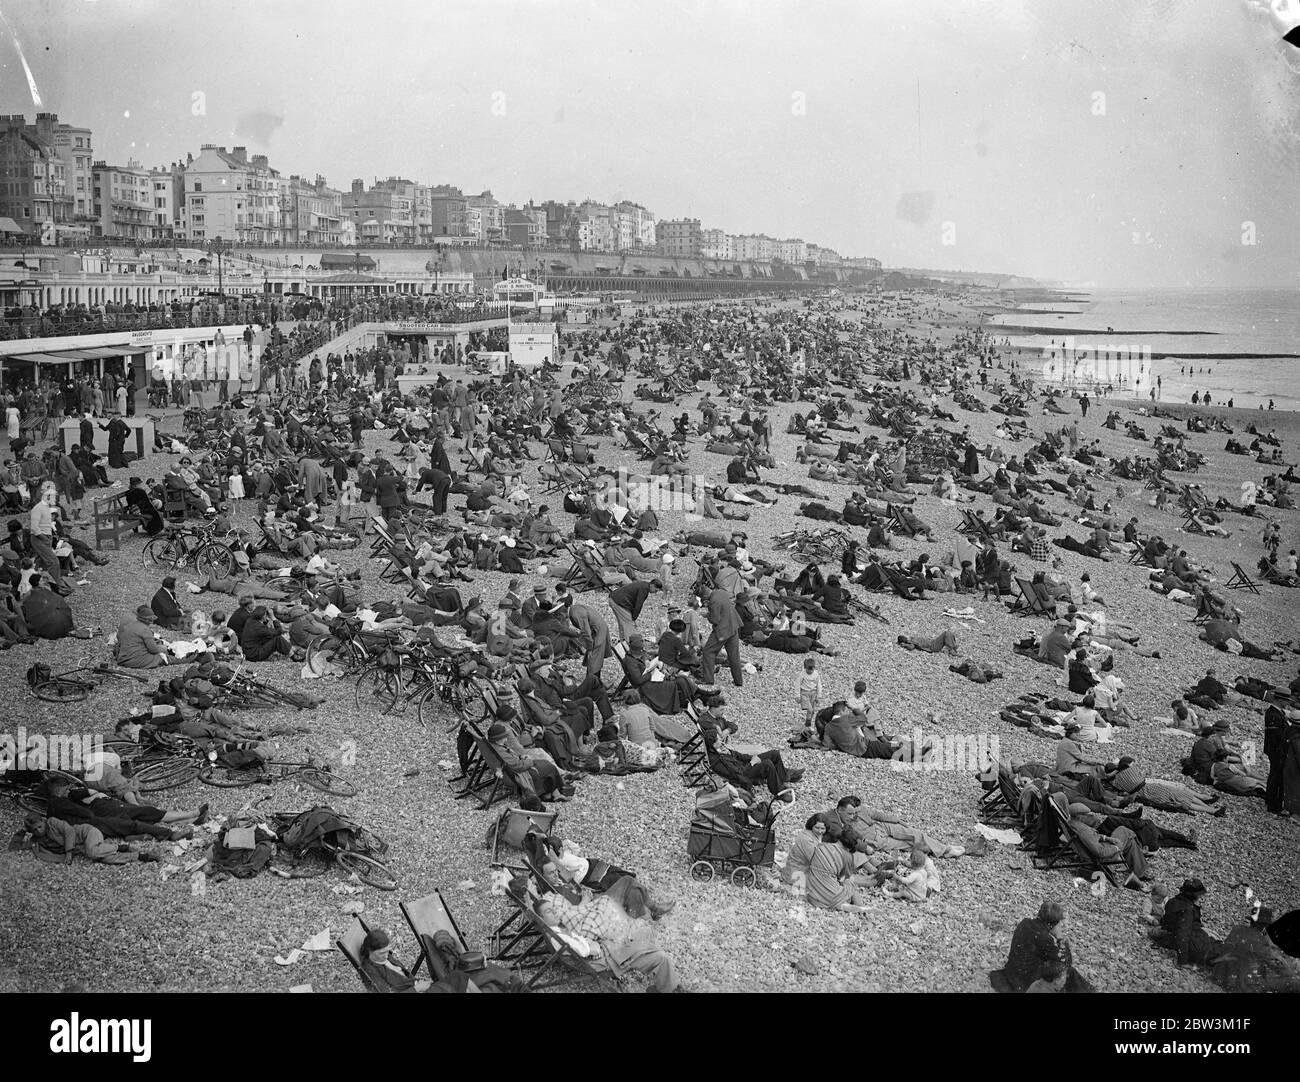 Holiday Crowds Seek The Sun at Brighton Whitsun holidaymakers , searching for the sun , flocked in their thousands to Brighton today ( Whit - Sunday ) . The sun shone brilliantly throughout the day and the beaches , promenade and piers were packed . Photo Shows : The crowded beach at Brighton today ( Whit - Sunday ) 31 May 1936 Stock Photo